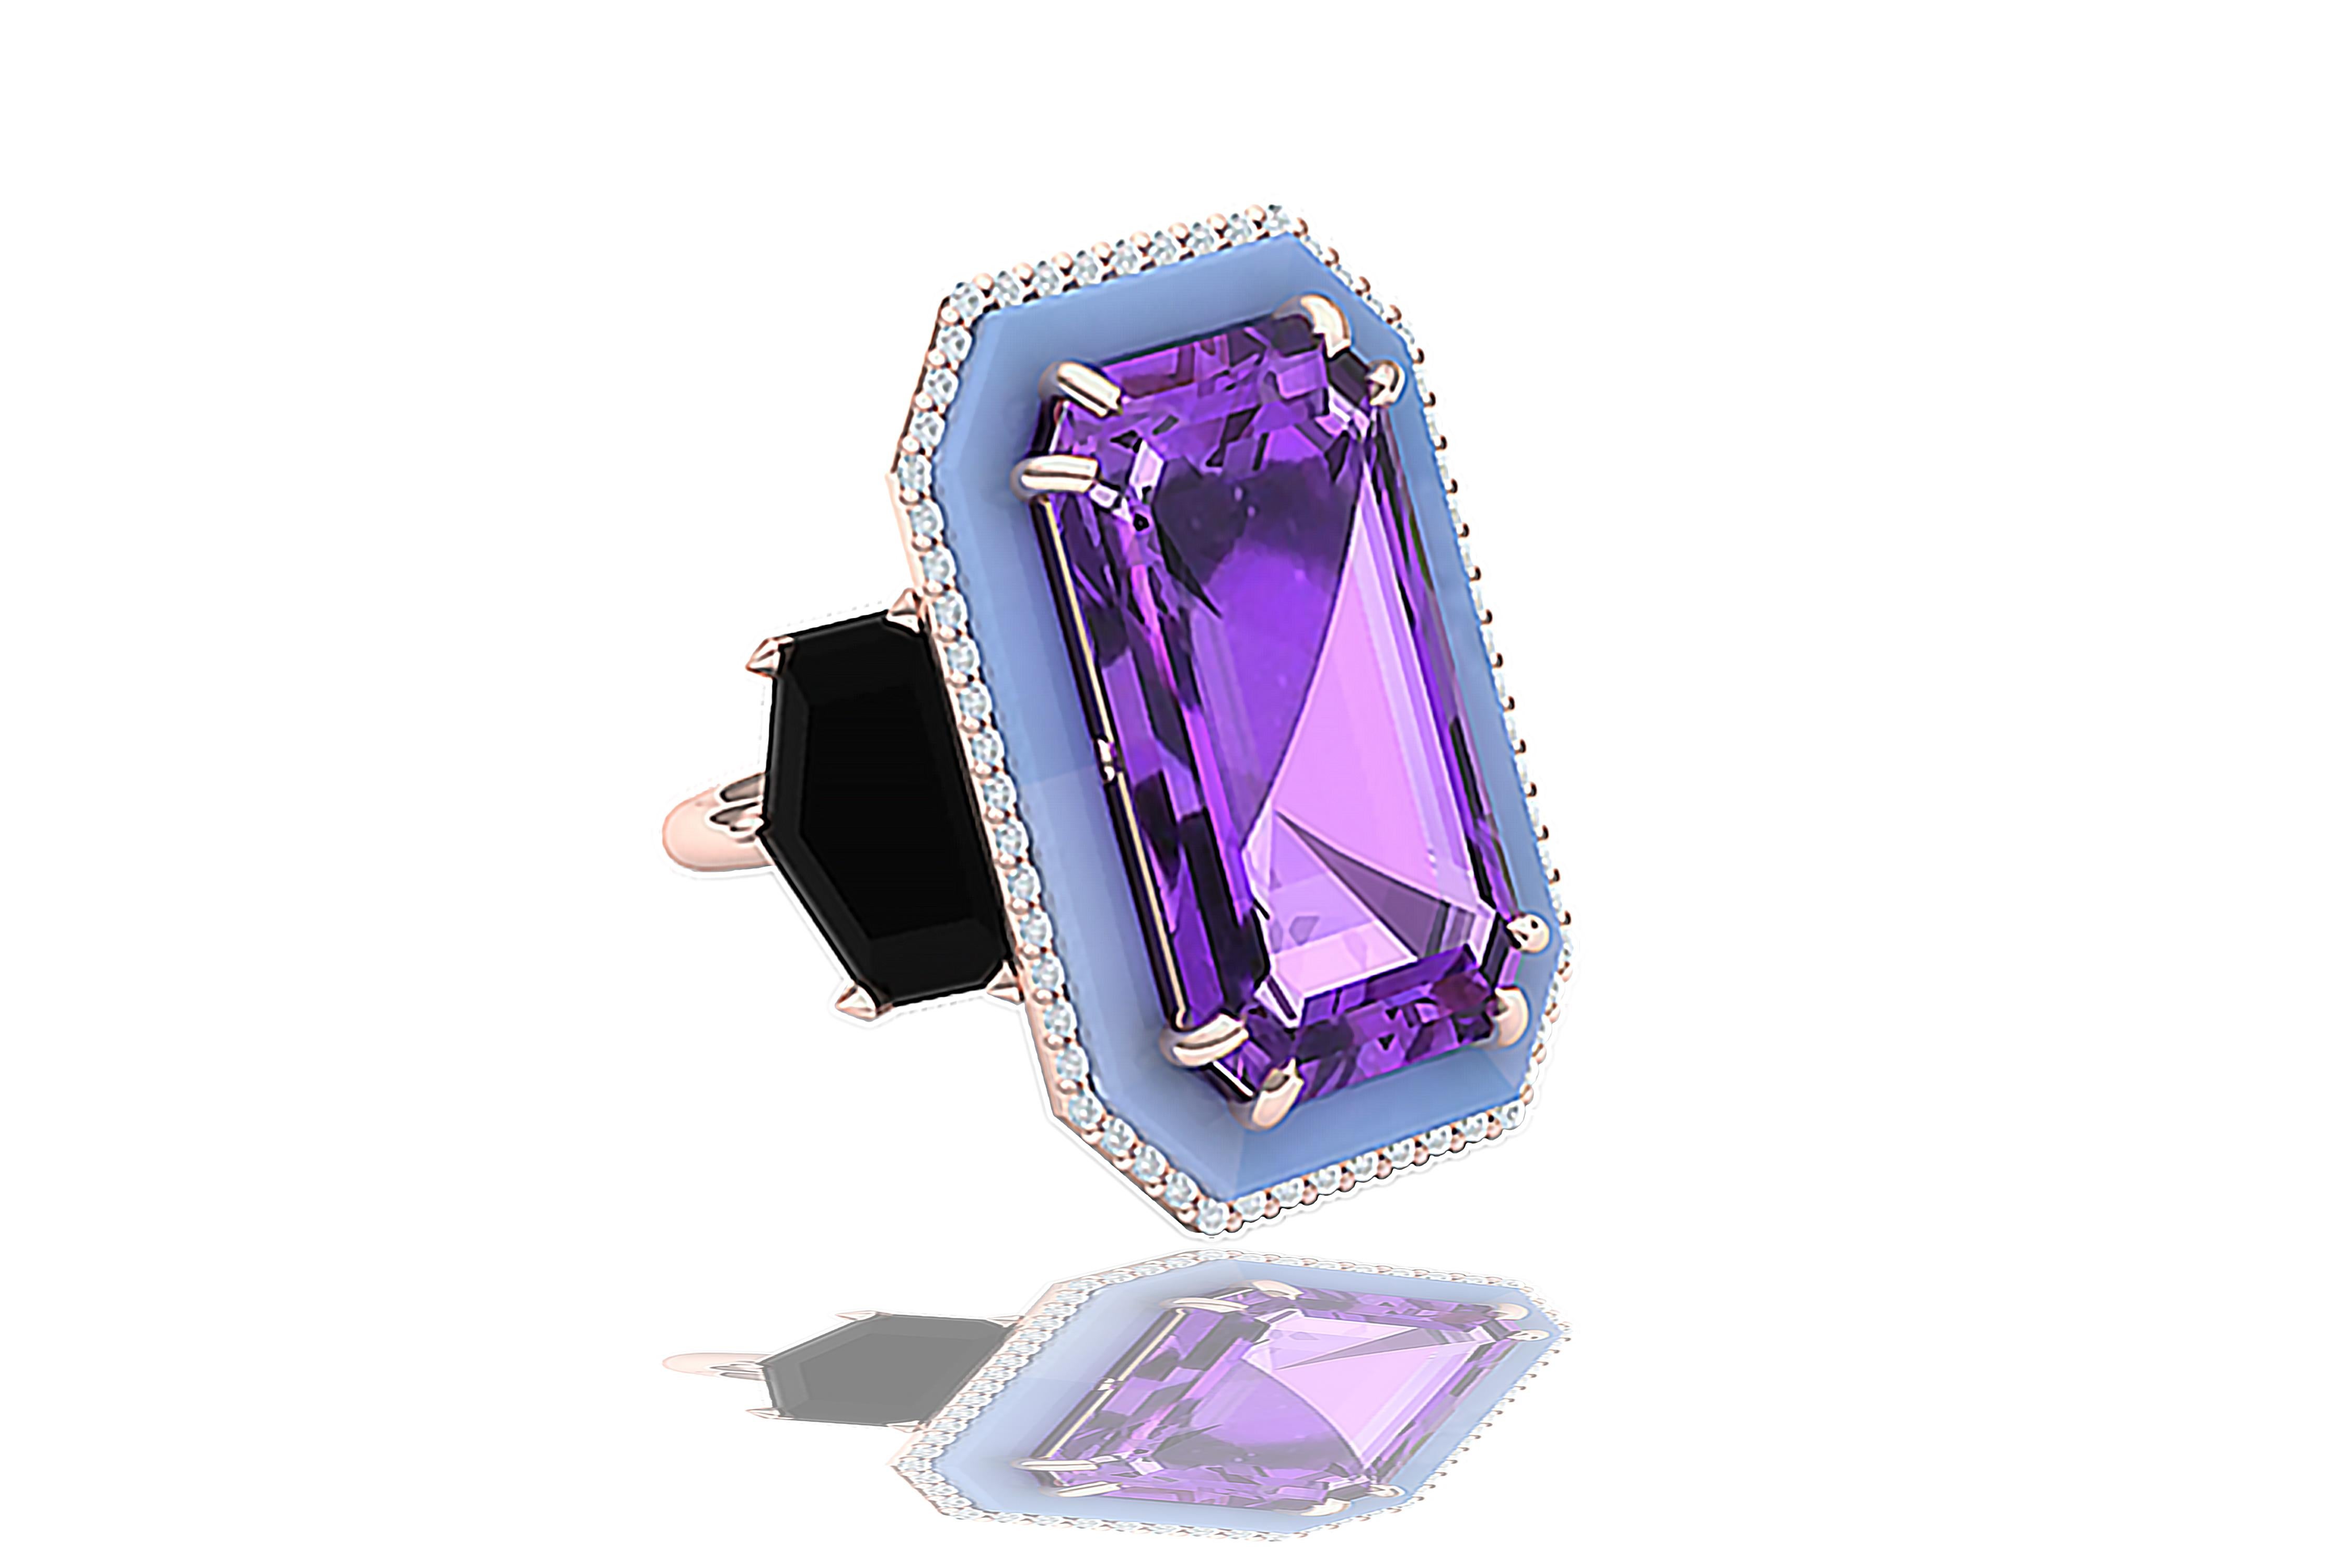 10 Carat Amethyst Onyx Diamond and Enamel Rose Gold Cocktail Ring In Excellent Condition For Sale In Aliso Viejo, CA